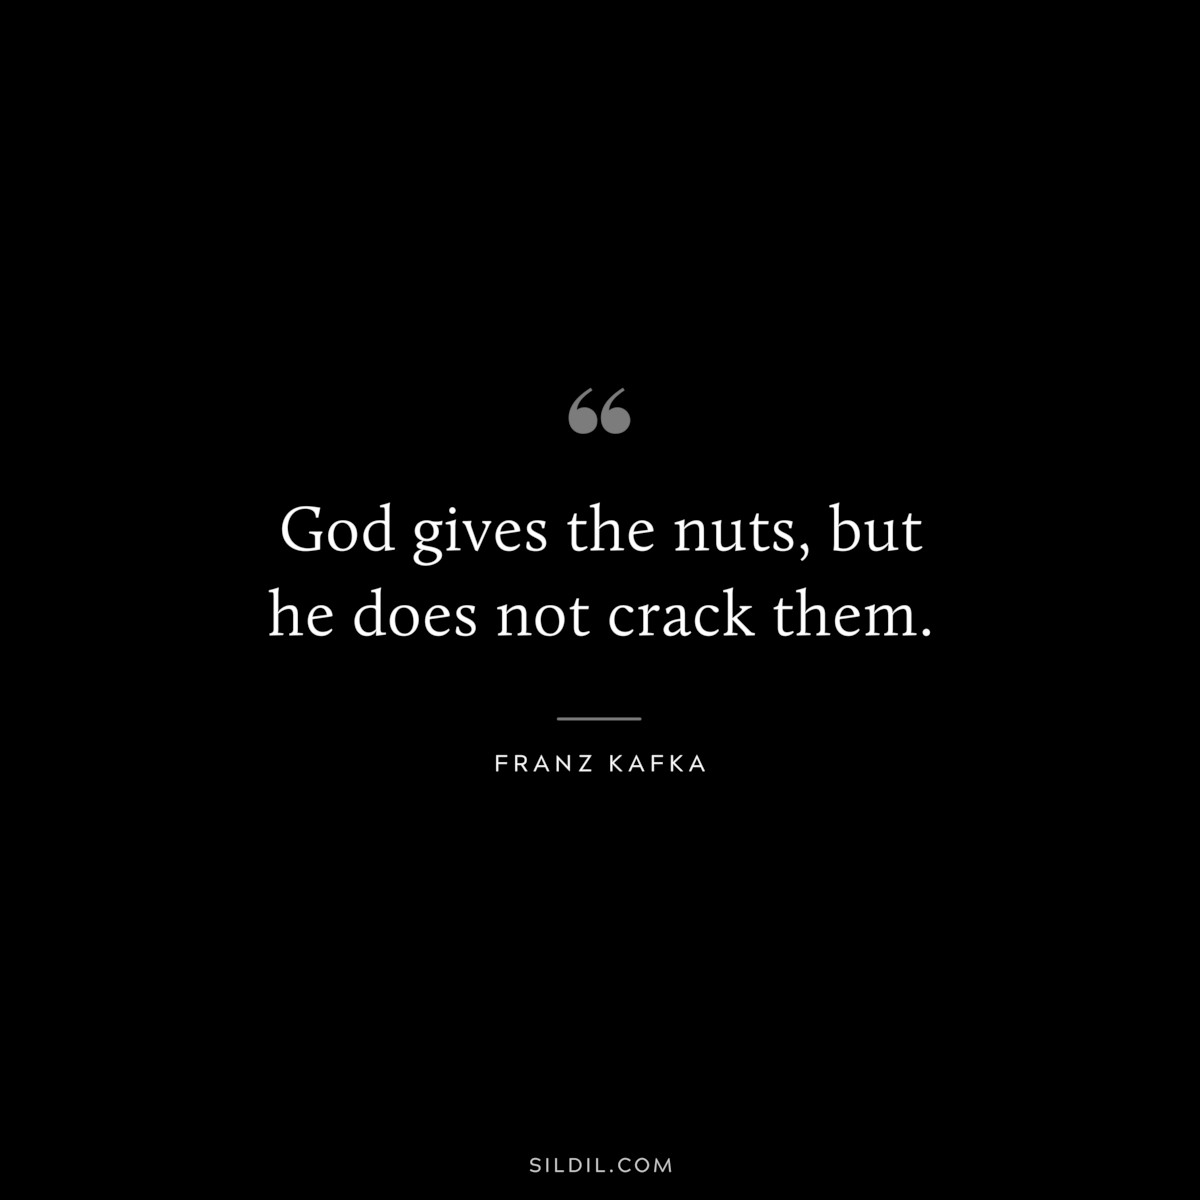 God gives the nuts, but he does not crack them. ― Franz Kafka